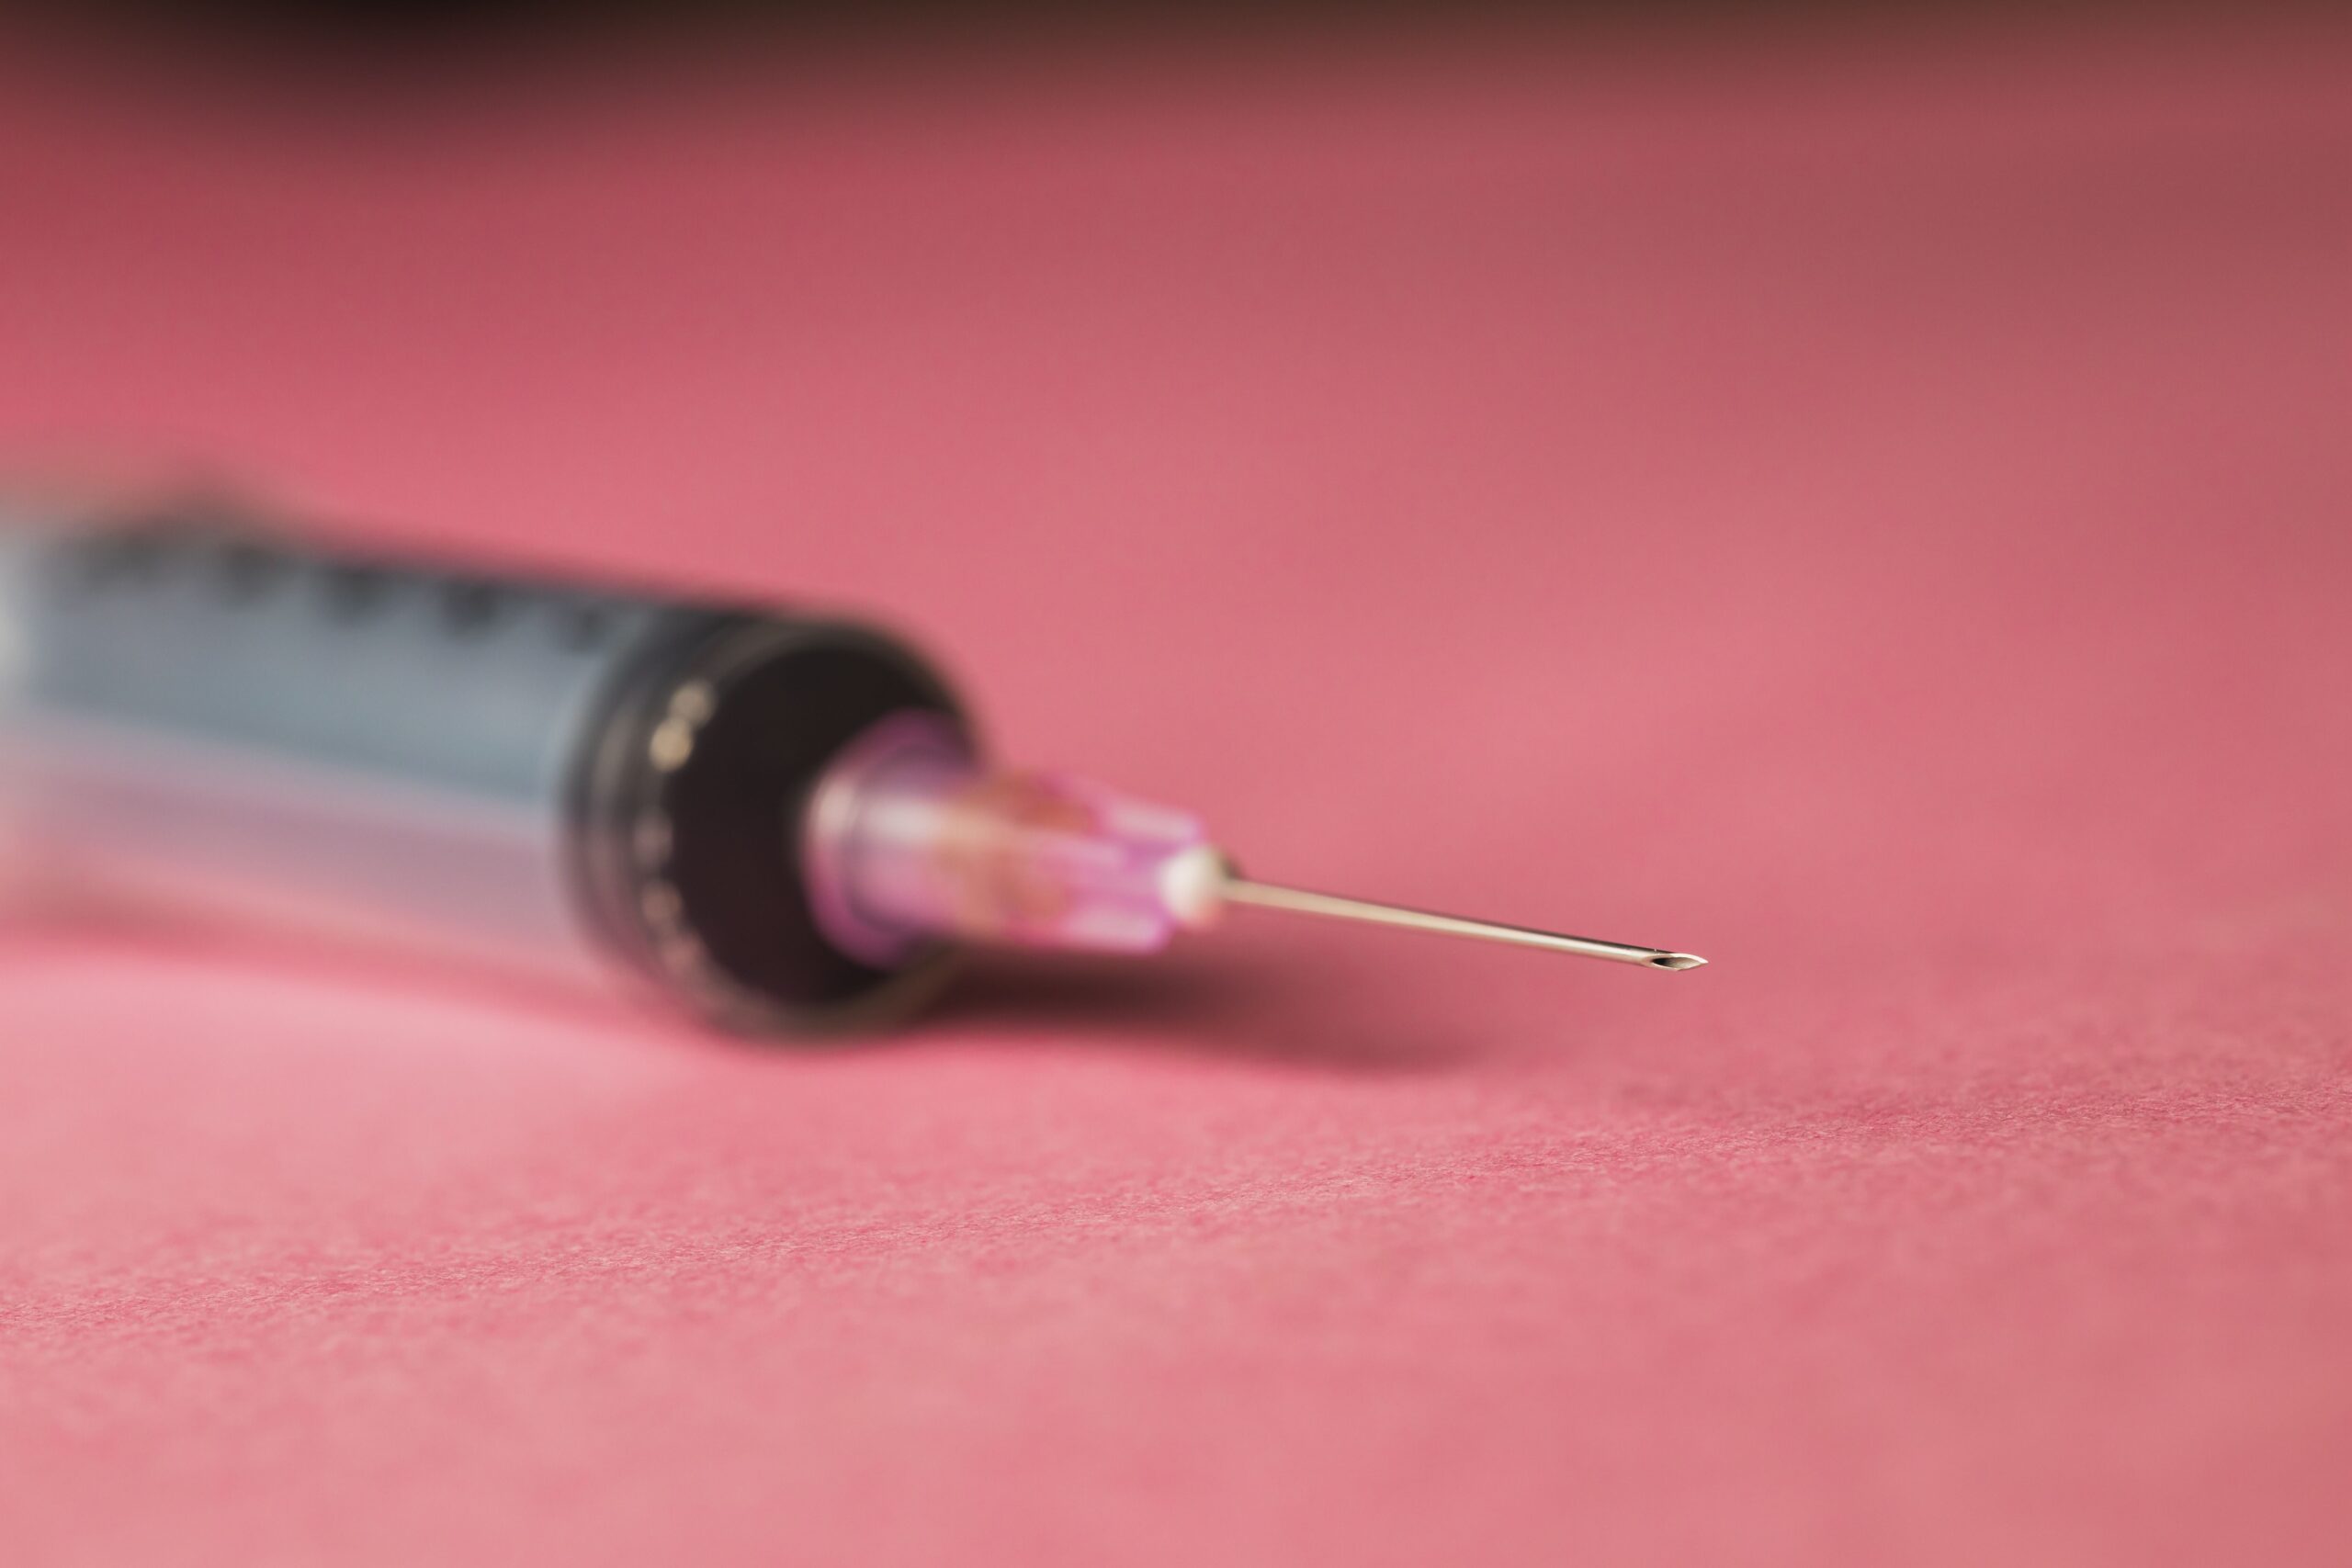 A closeup of a syringe with a needle on a pink background